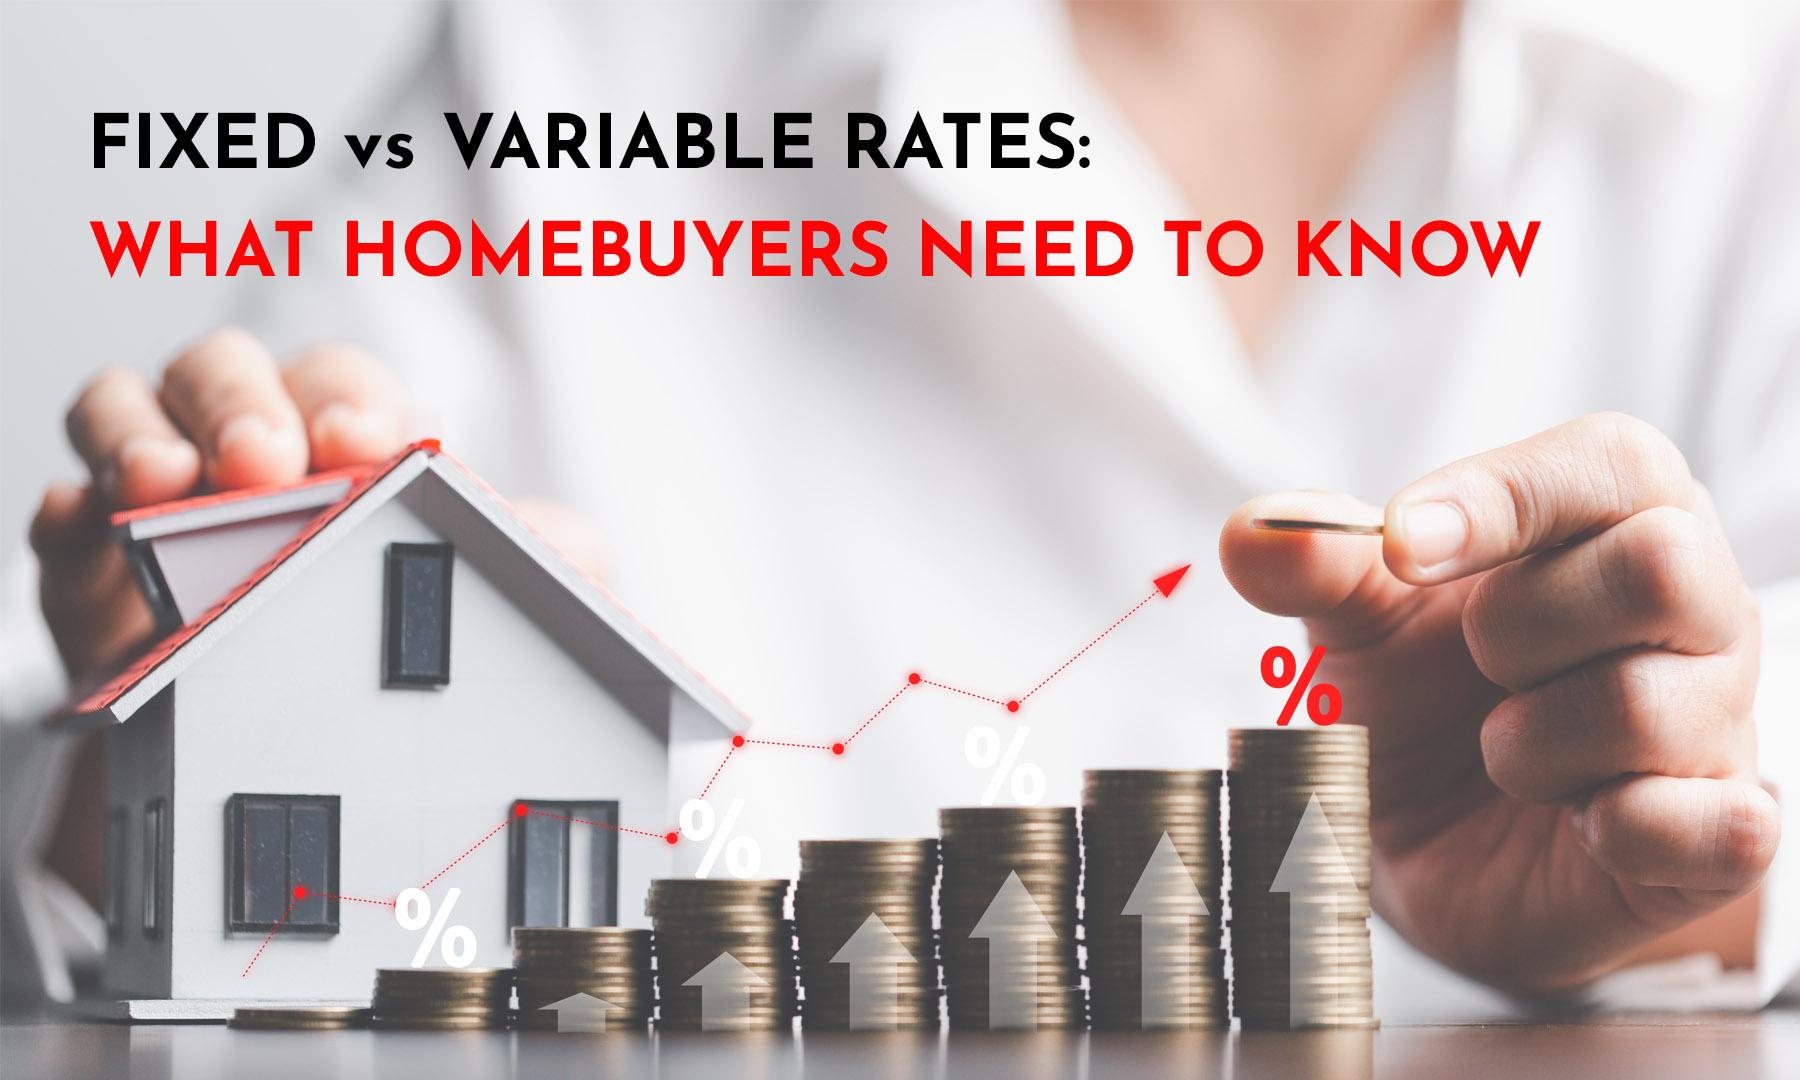 FIXED VS VARIABLE INTEREST RATES: WHAT HOMEBUYERS NEED TO KNOW